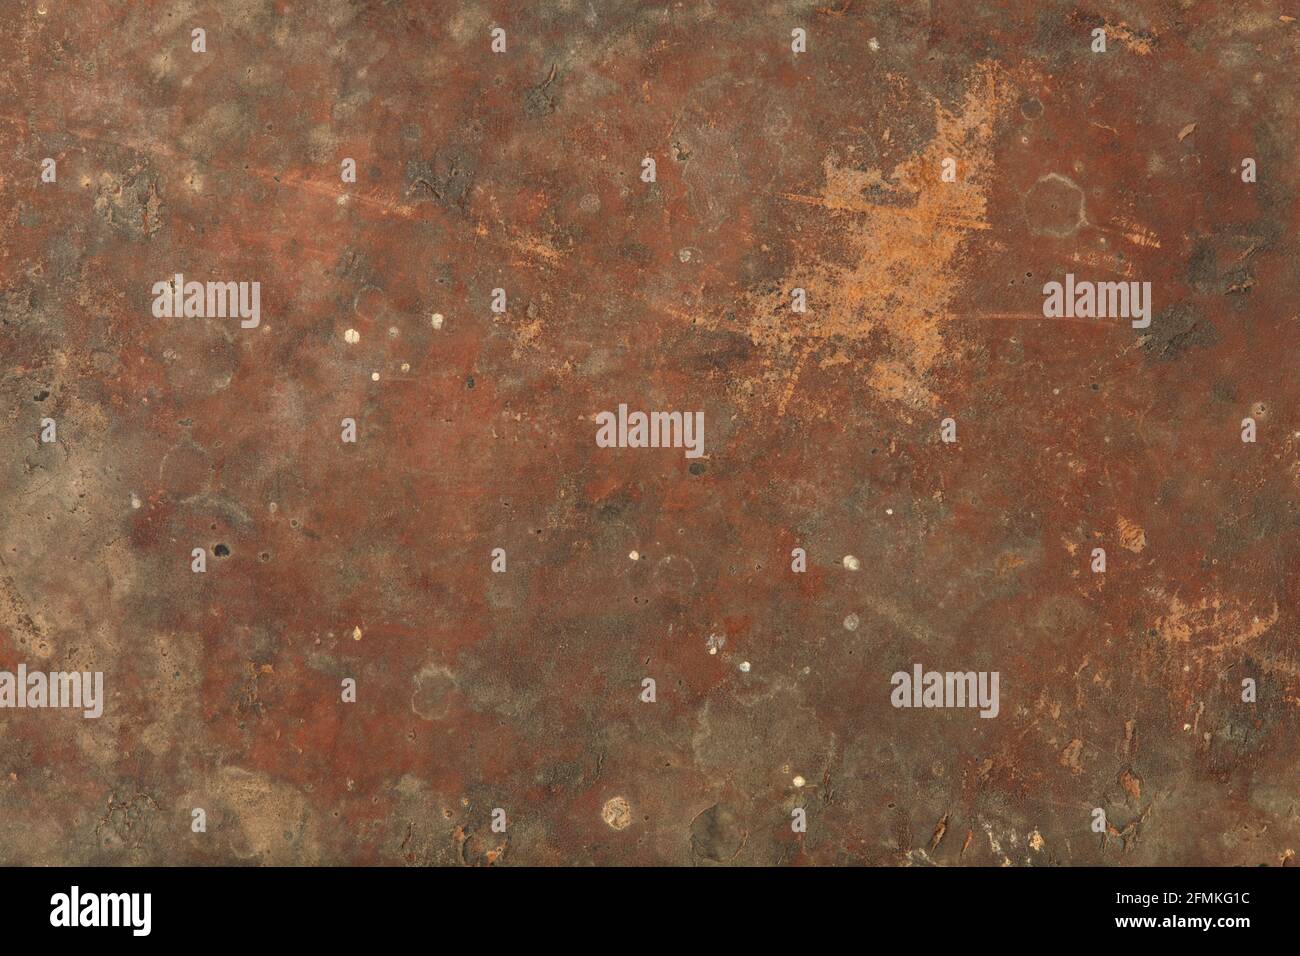 Brown, worn and stained, ancient texture background Stock Photo